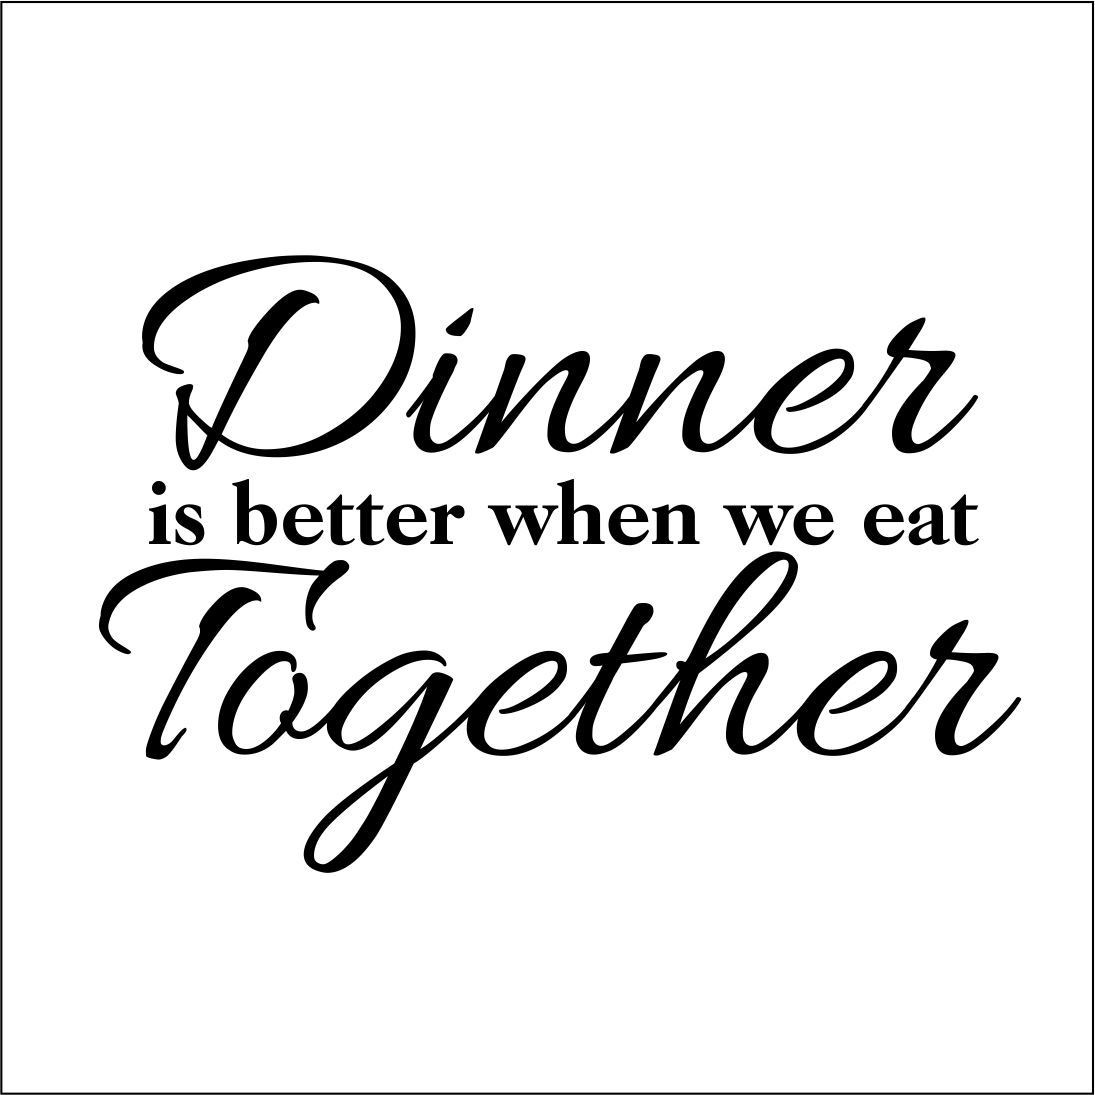 Quotes About Family Eating Together. QuotesGram